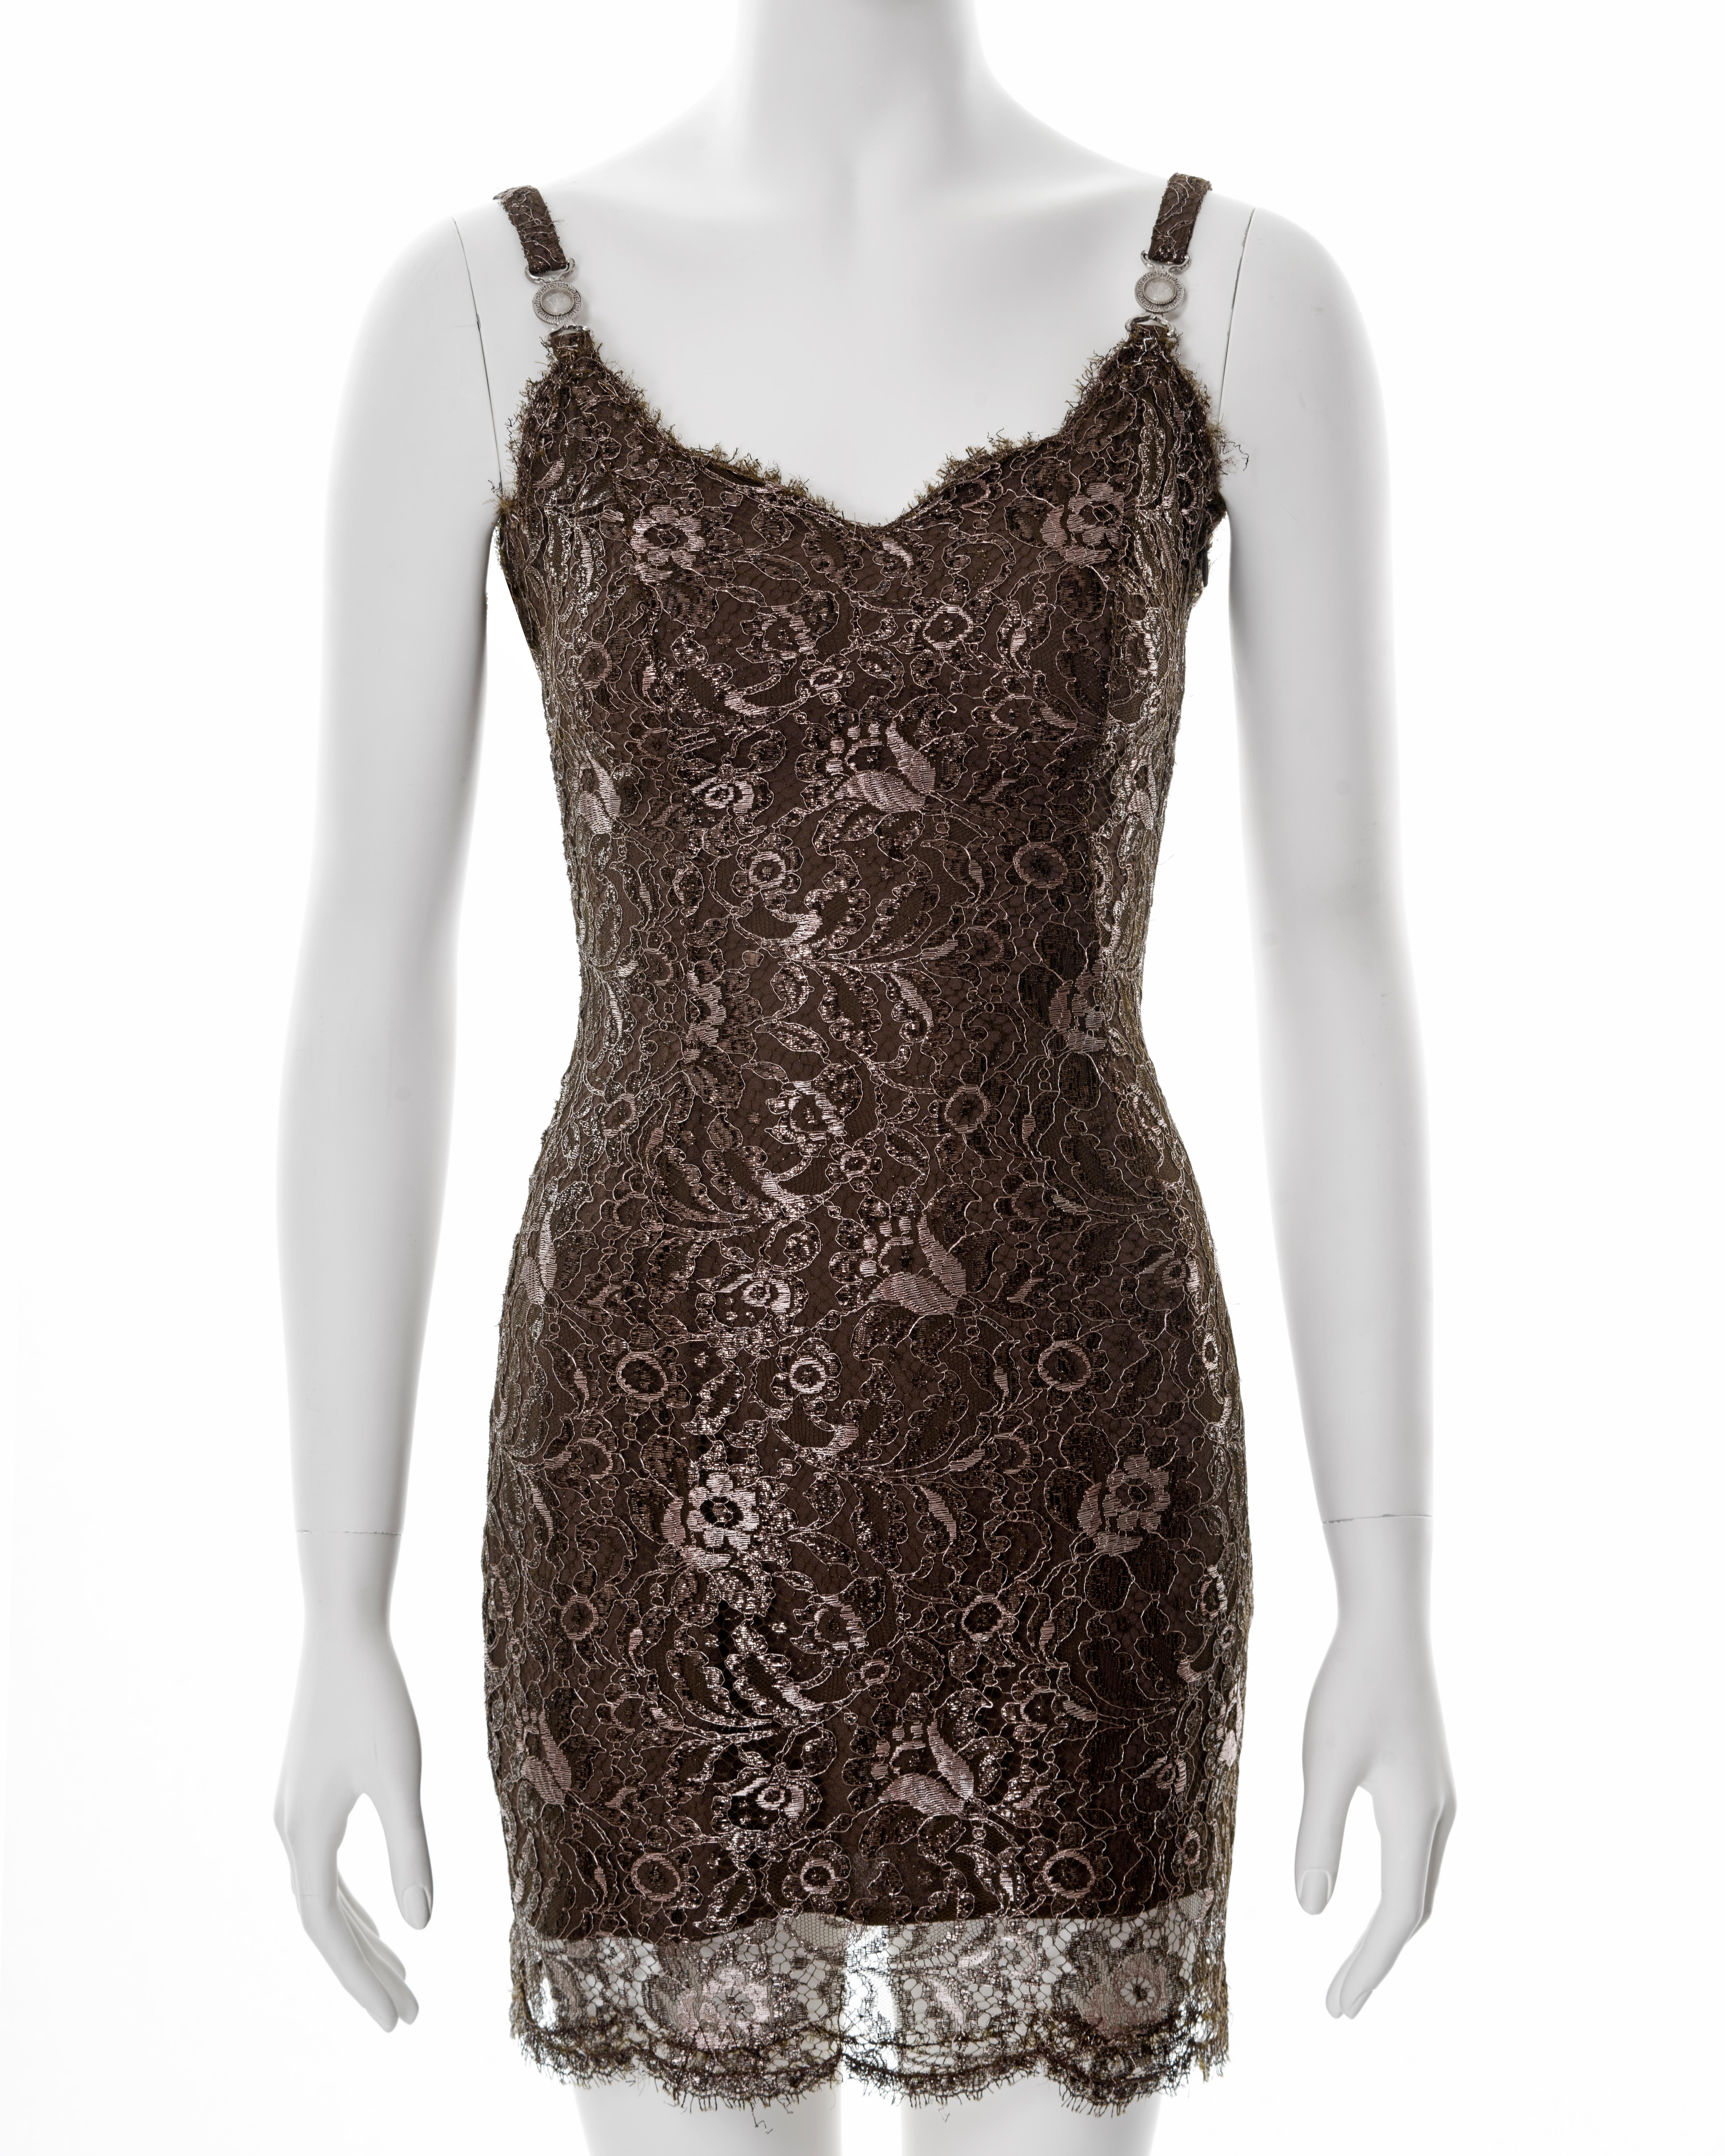 Gianni Versace metallic brown lace evening mini dress, fw 1996 In Good Condition For Sale In London, GB